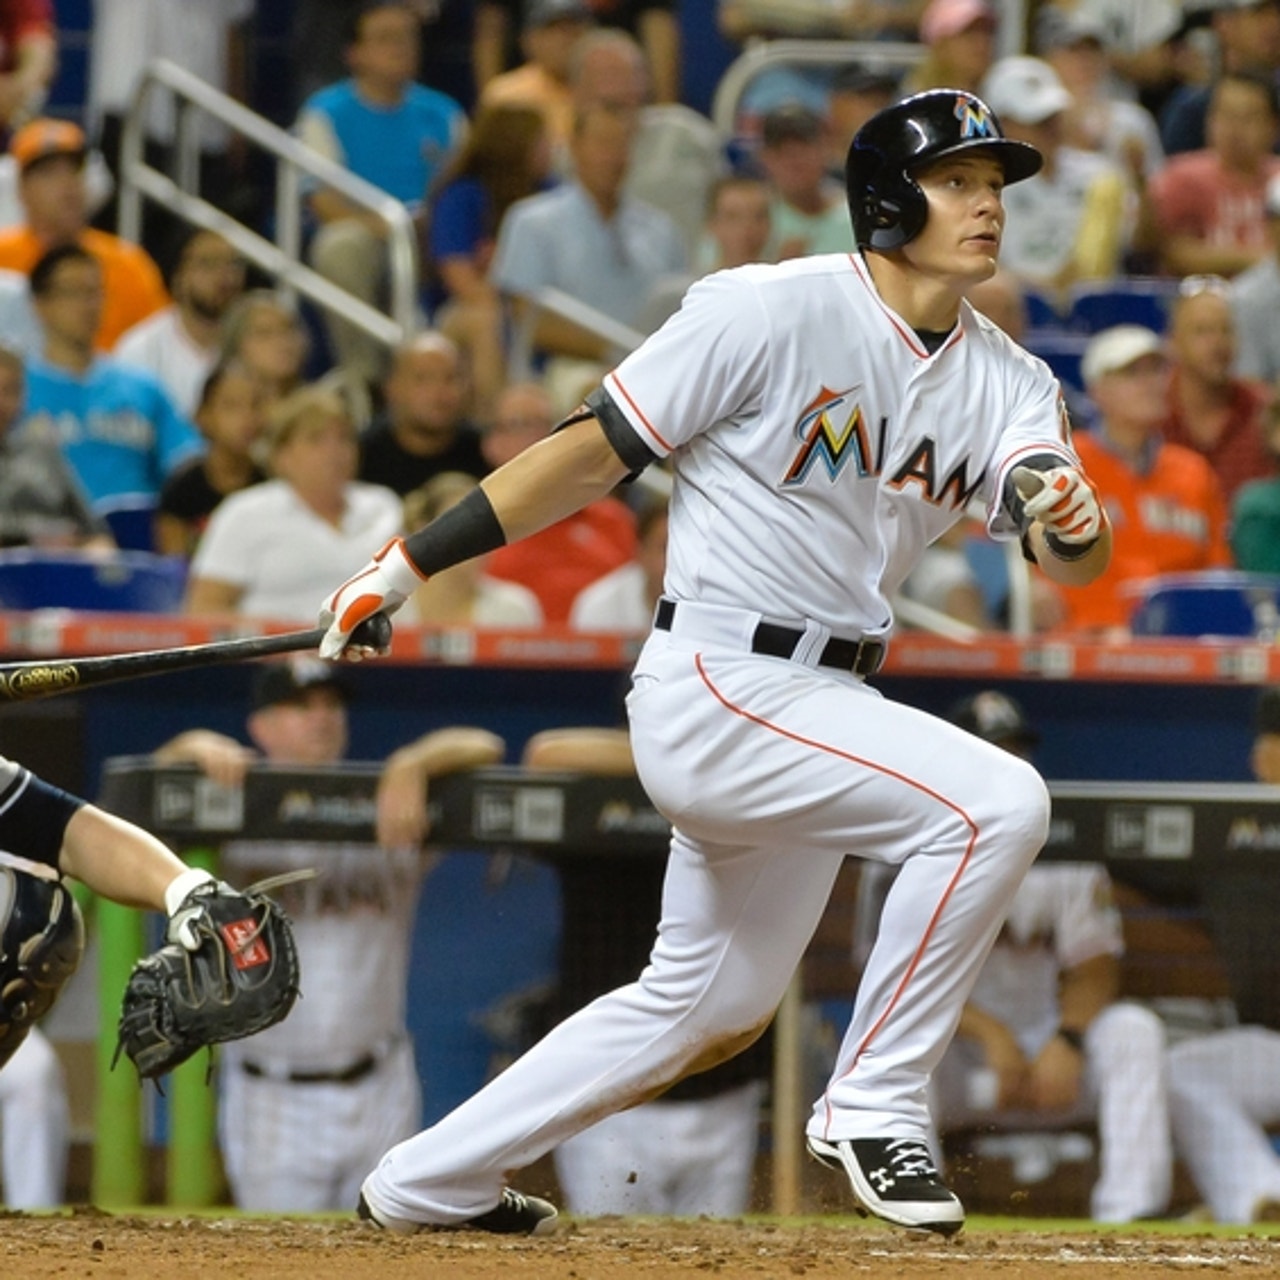 What is Derek Dietrich's path to the Opening Day roster